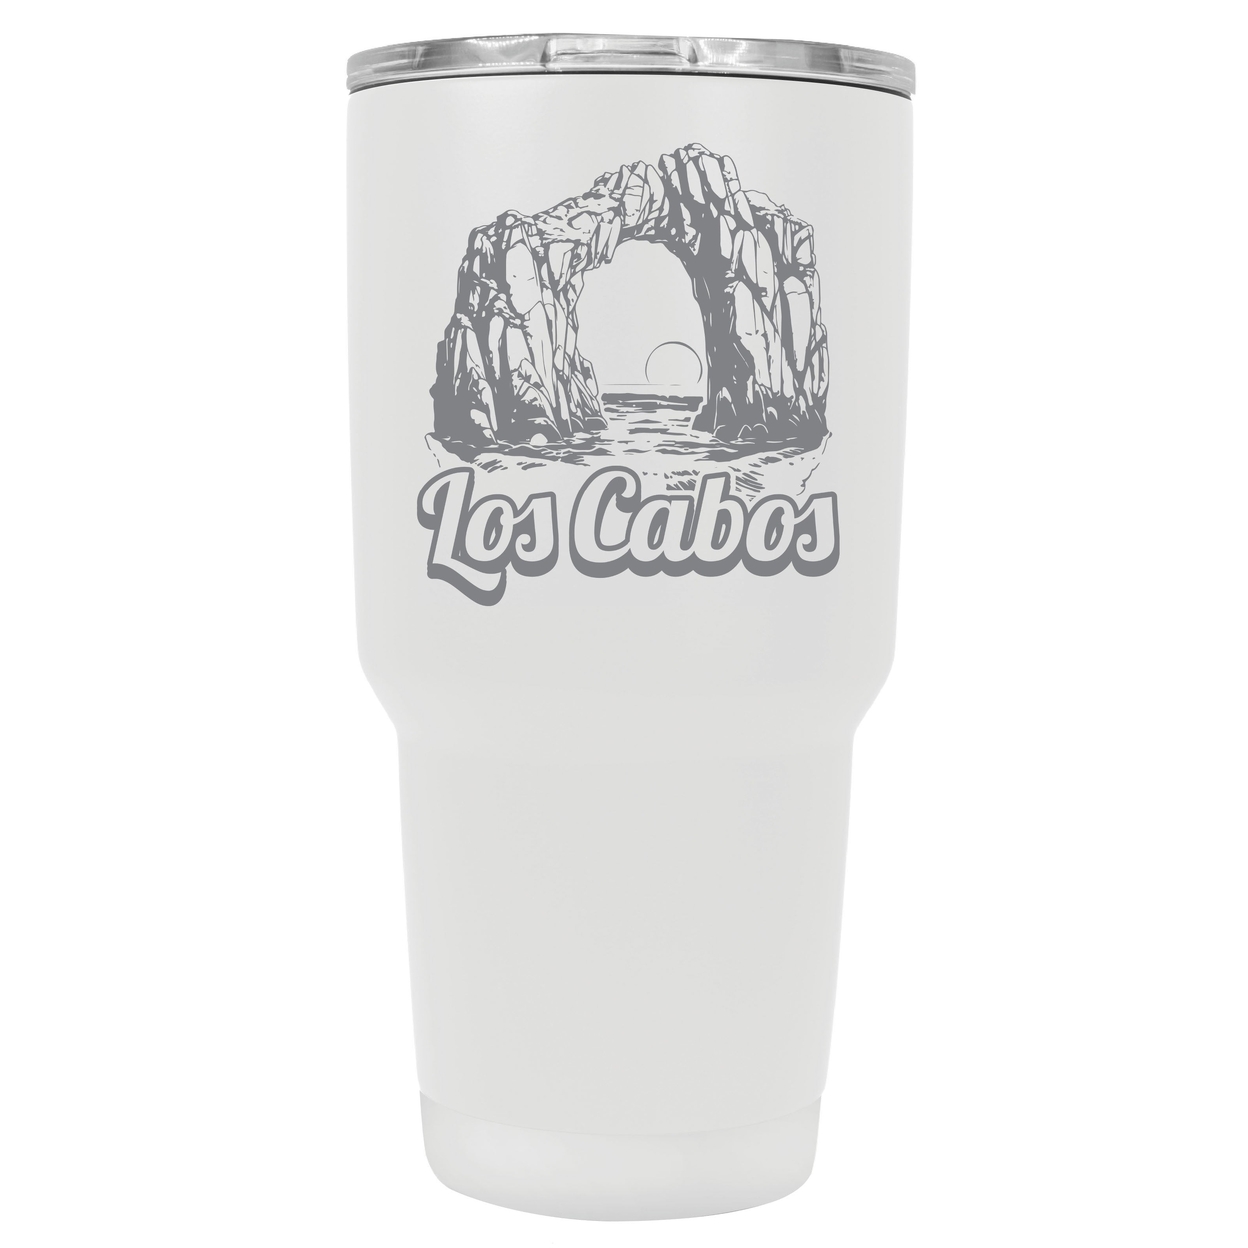 Los Cabos Mexico Souvenir 24 Oz Engraved Insulated Stainless Steel Tumbler - White,,Single Unit